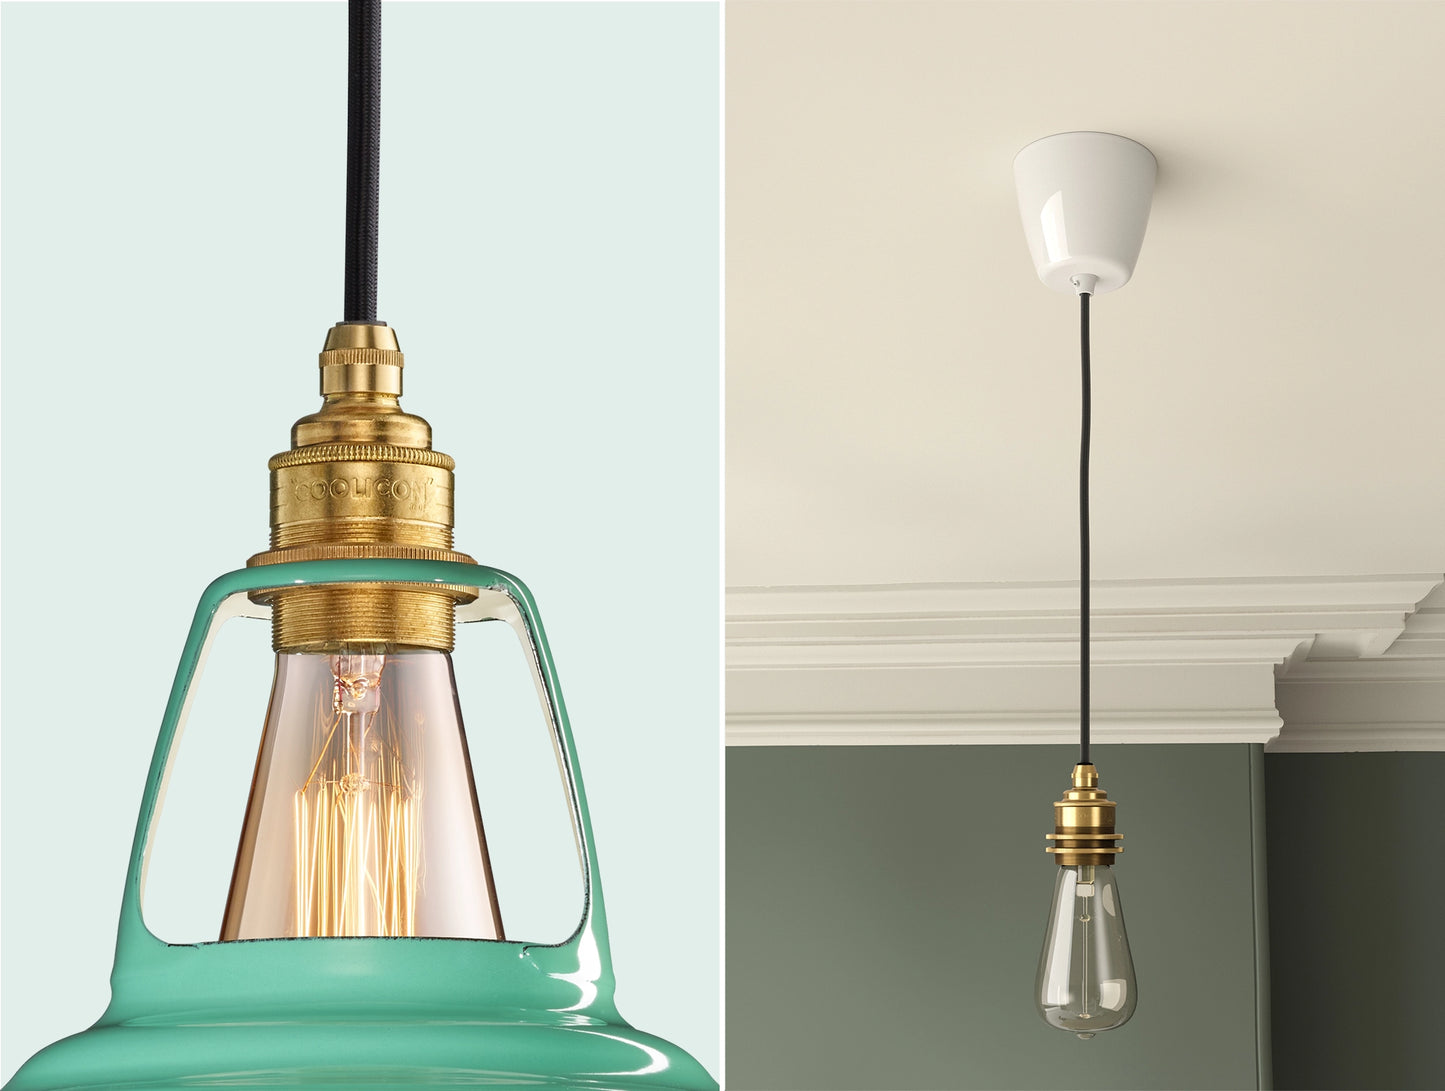 Close up of an E27 Signature Brass suspension set on a Fresh Teal lampshade on the left. On the right, an E27 Brass pendant set with a lightbulb is hanging from the ceiling